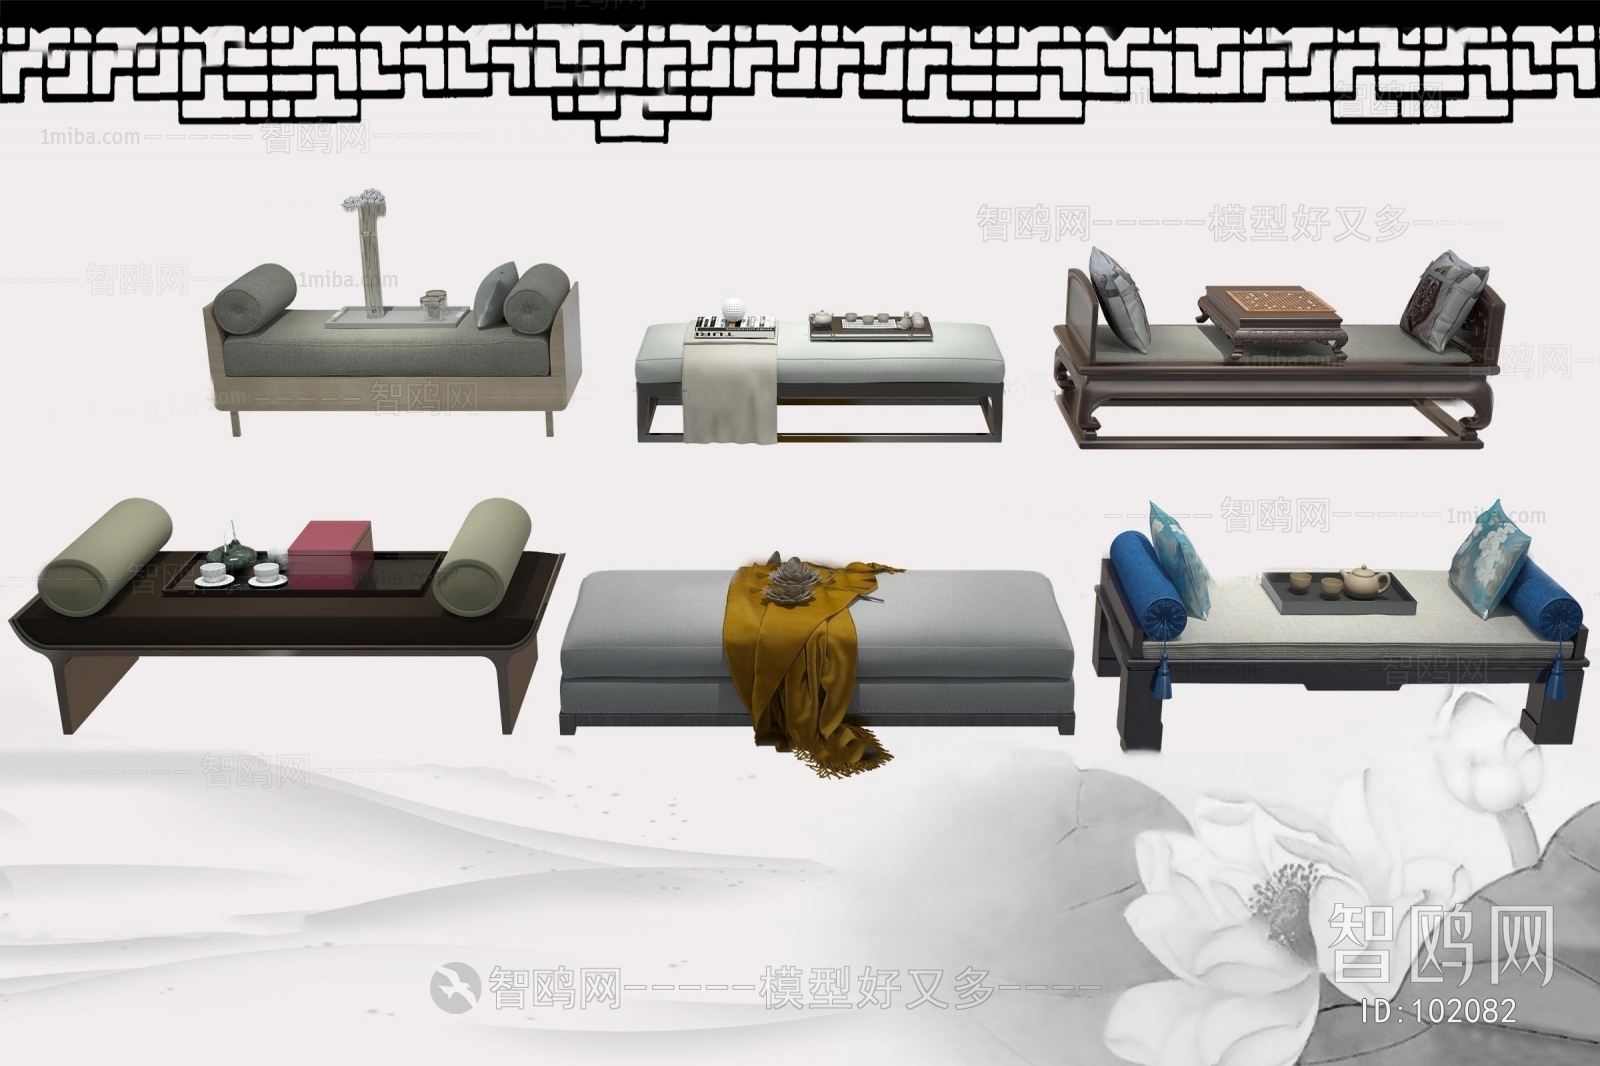 New Chinese Style Footstool